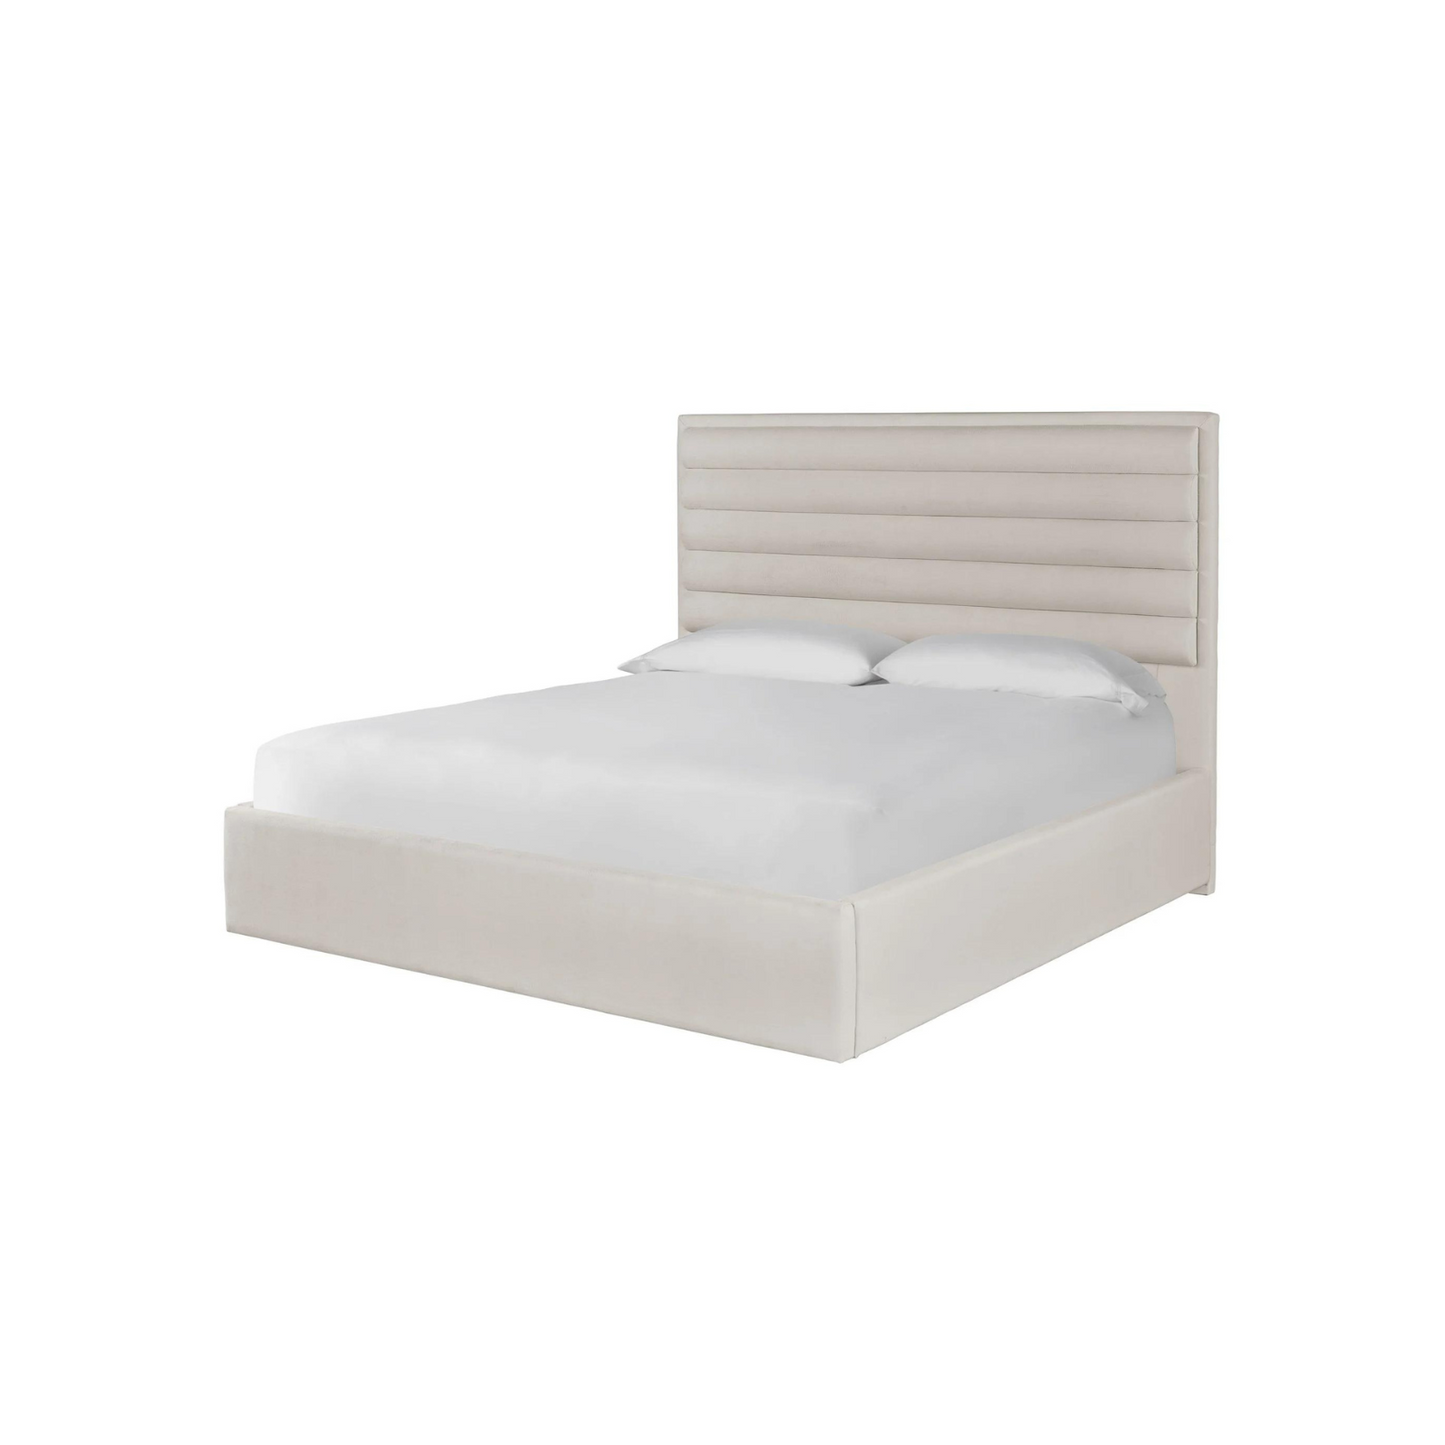 Tranquility Upholstered Bed